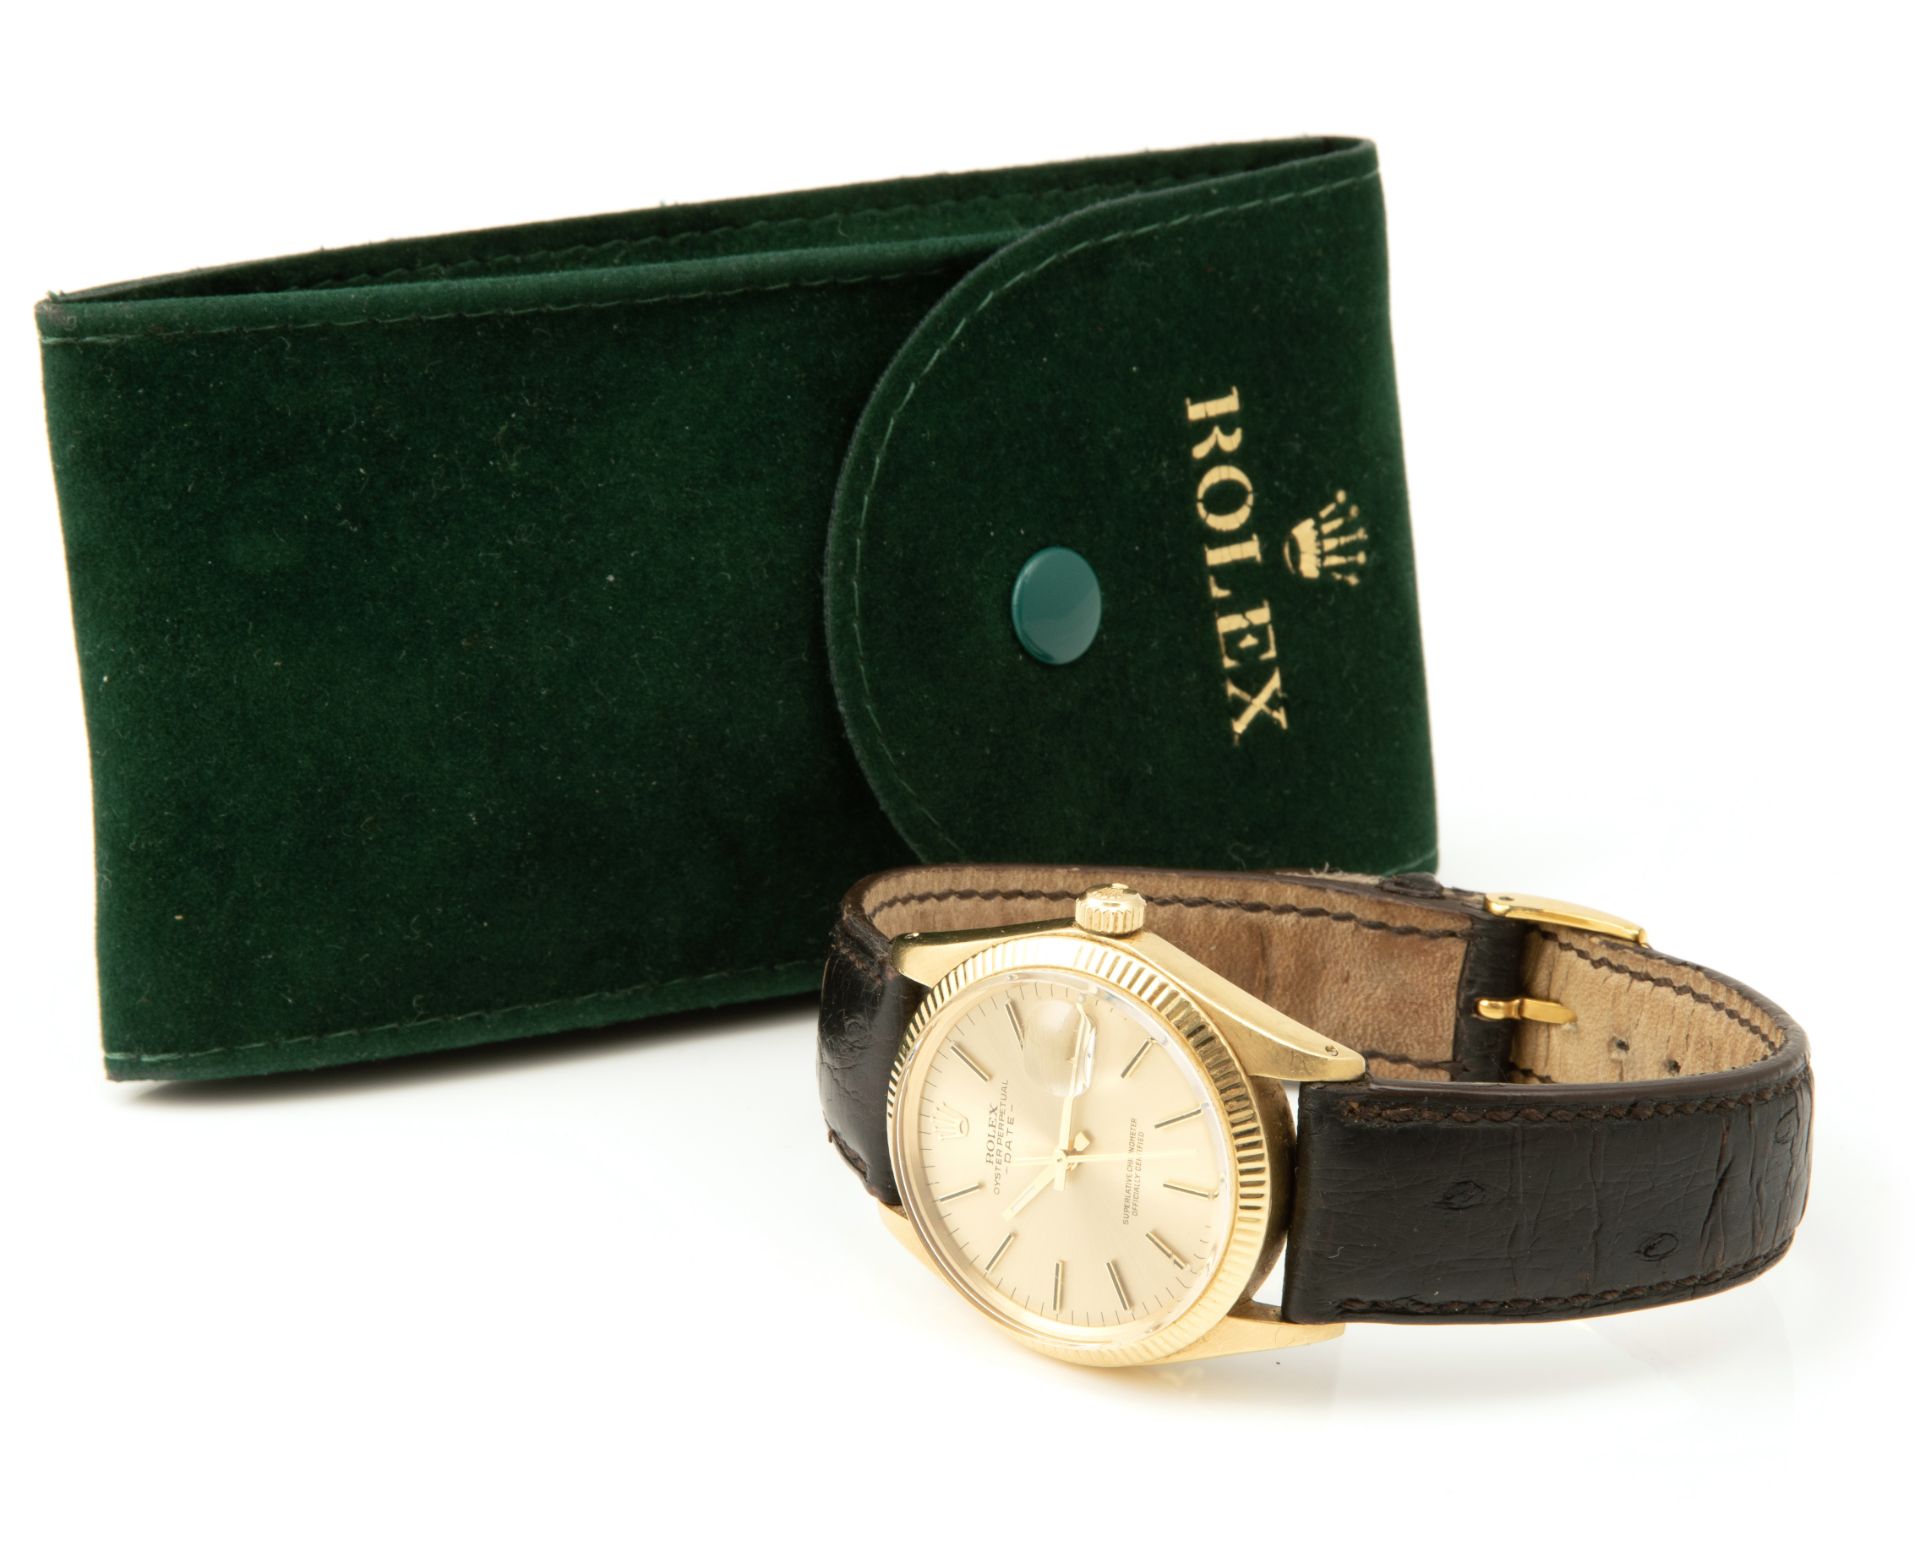 Rolex Oyster Pepertual Date - Image 4 of 4